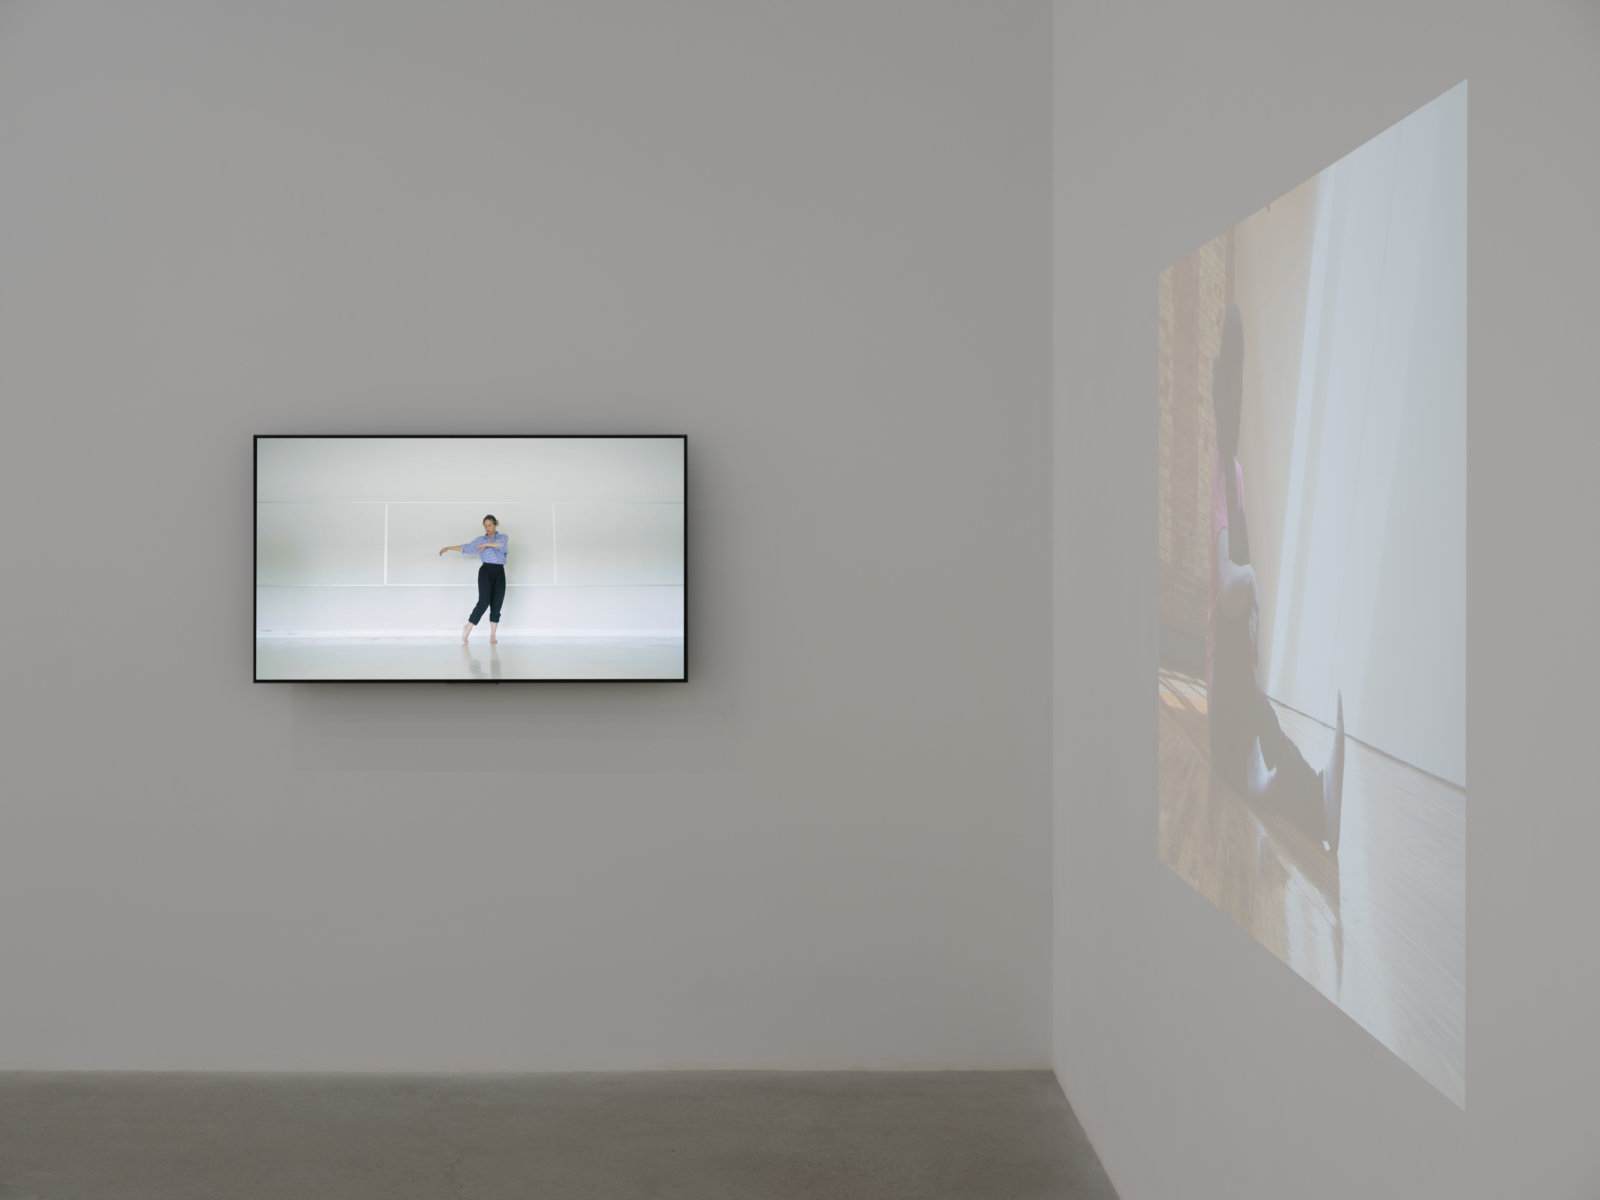 Tanya Lukin Linklater, ...you are judged to be going against the flow because you are insistent., Parts 1 and 2, 2017, video, monitor (Part 1) 11:28 min; projection (Part 2), 14:52 min, dimensions variable